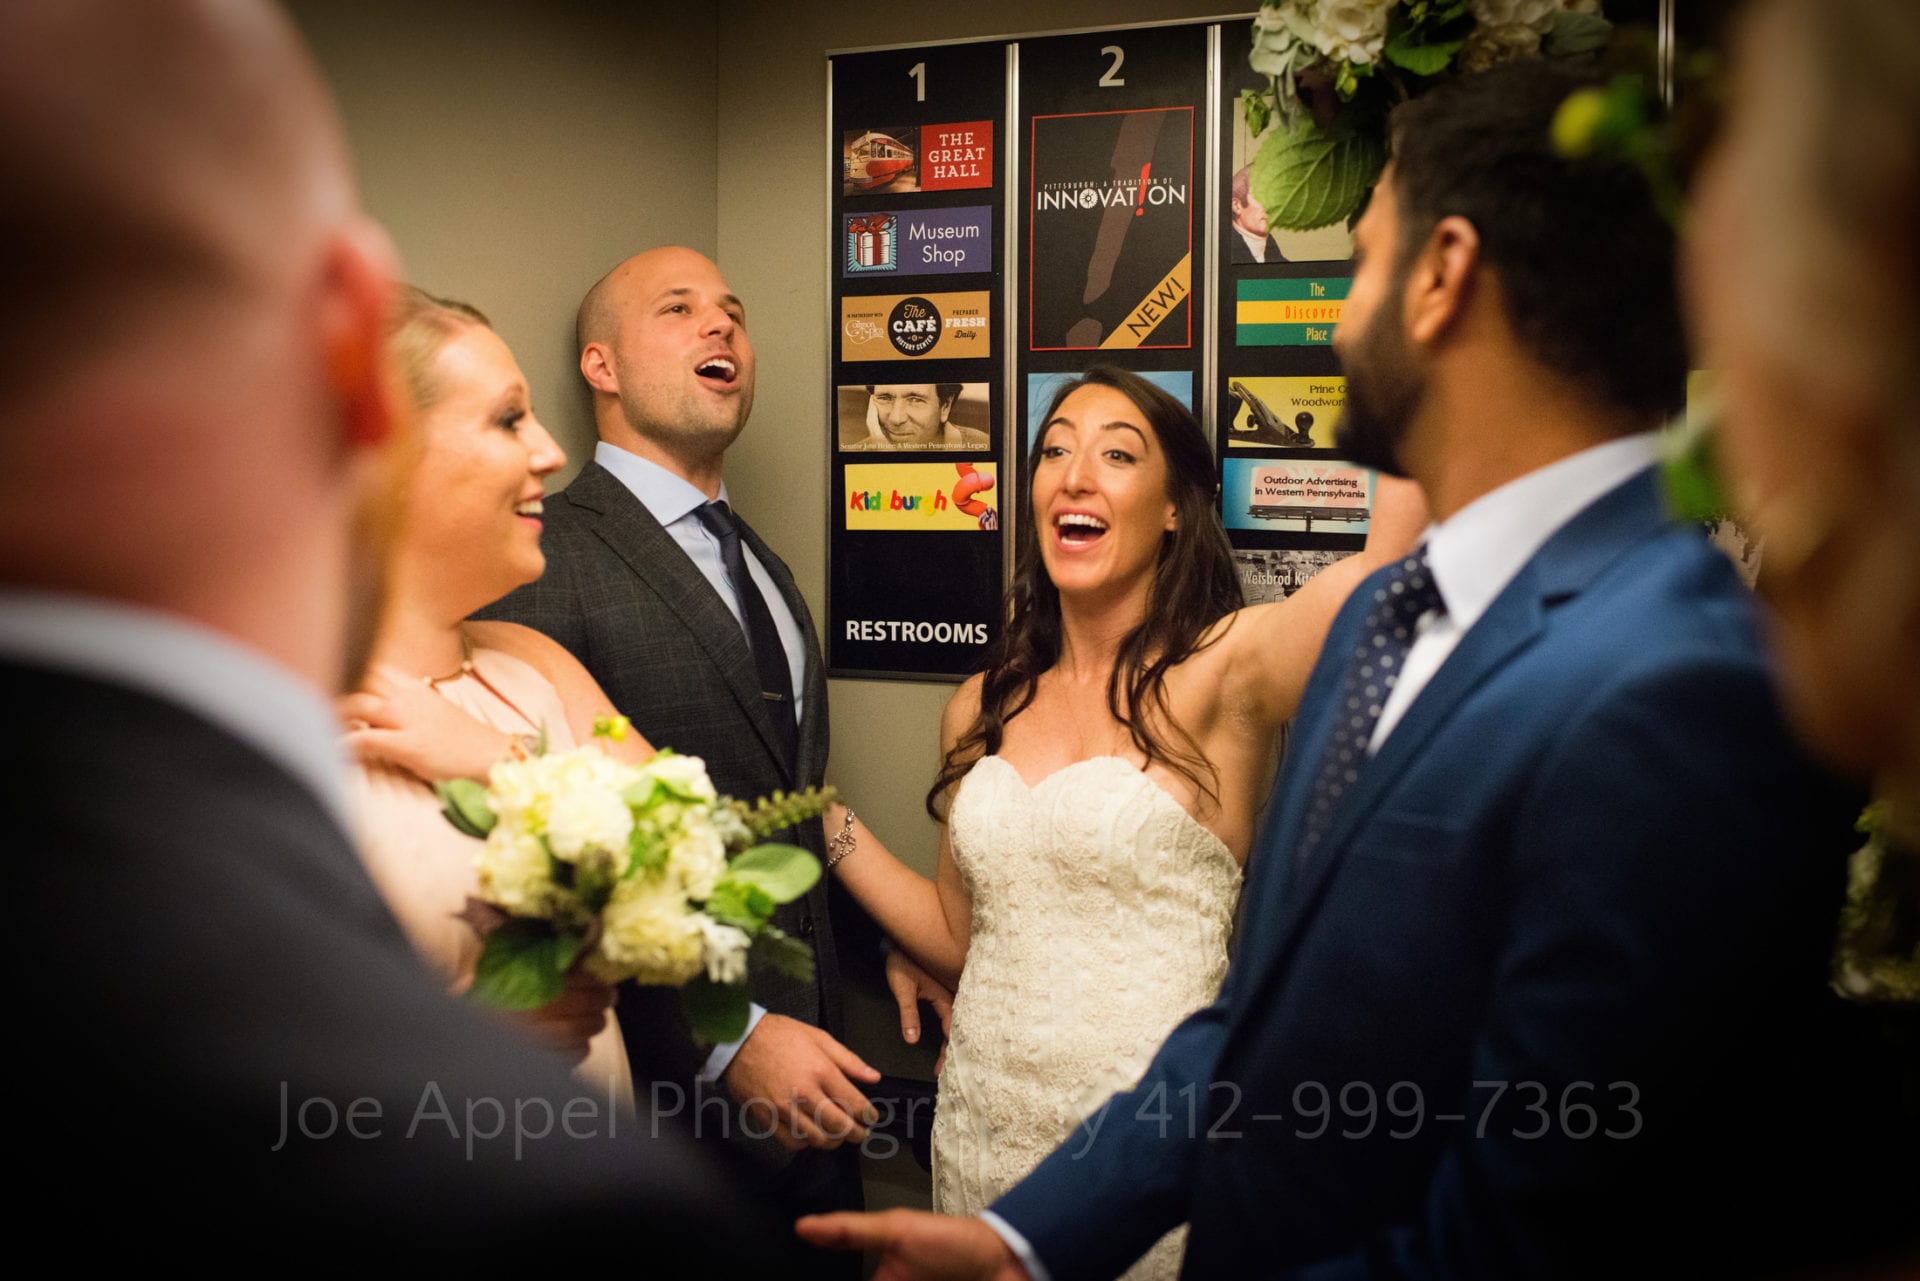 Bride and groom laugh as they stand with their bridal party in the elevator at the Heinz History Center.